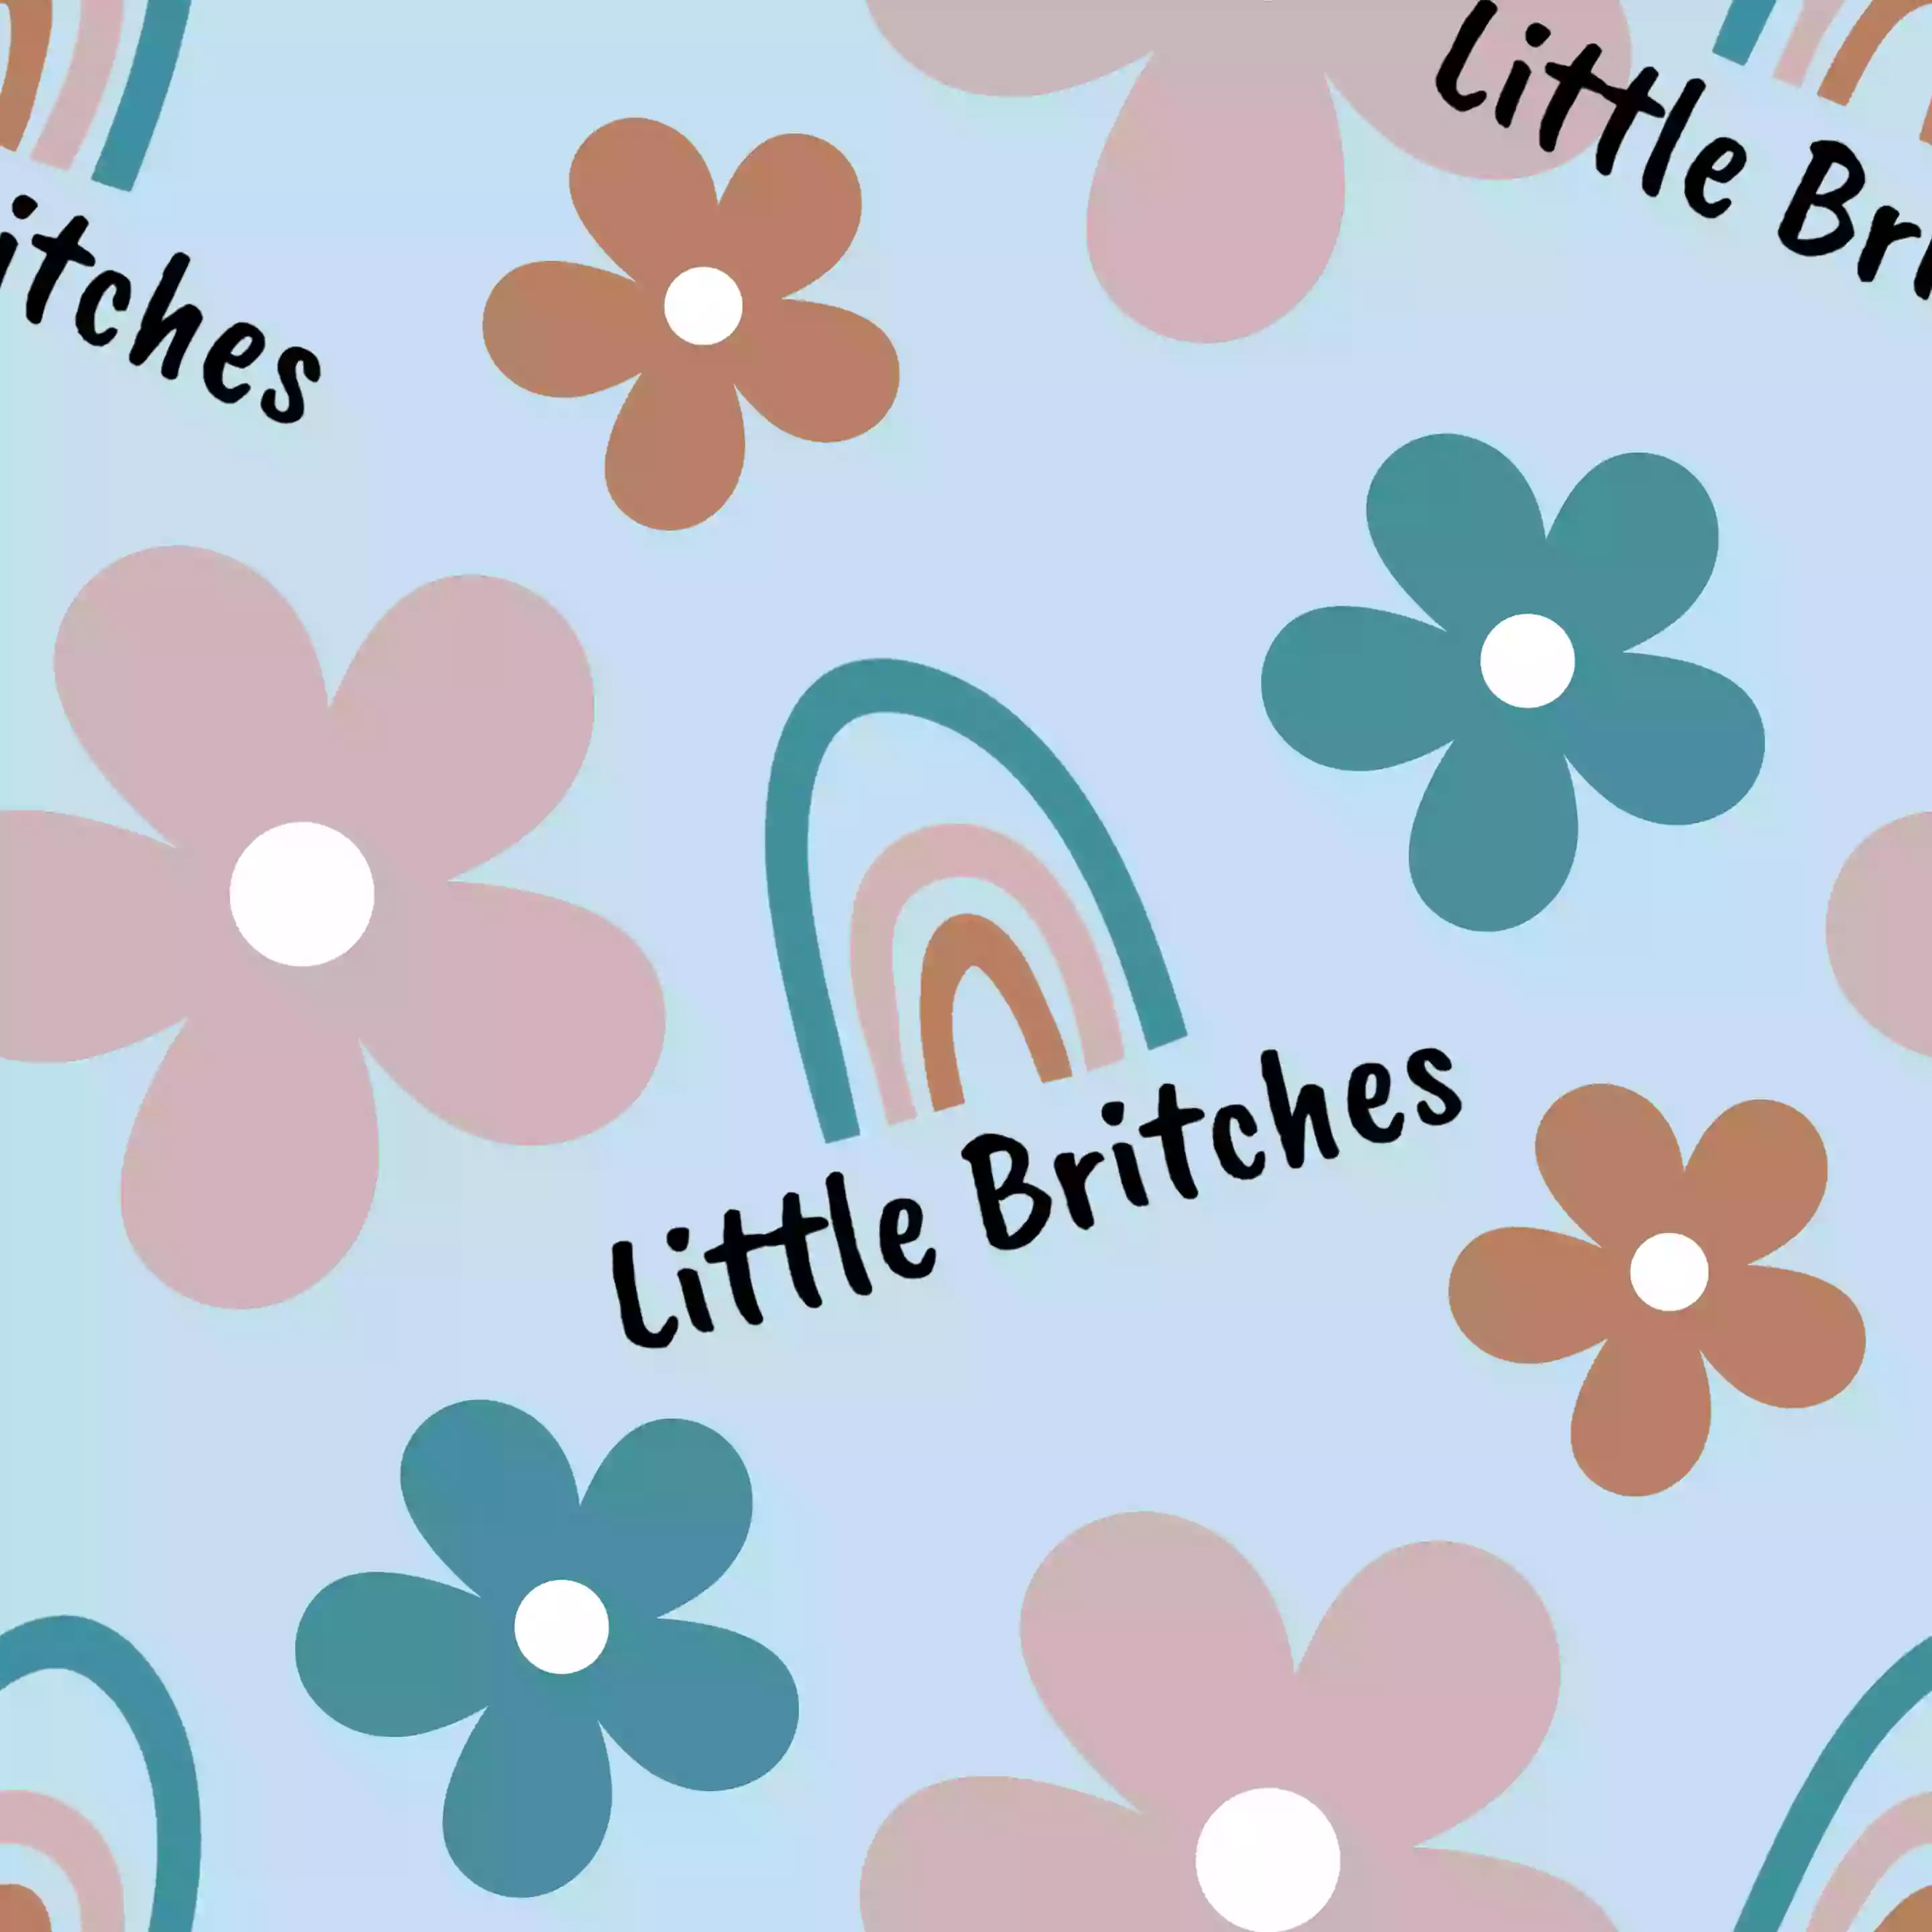 Little Britches Children's Boutique, Resale, and Gifts.